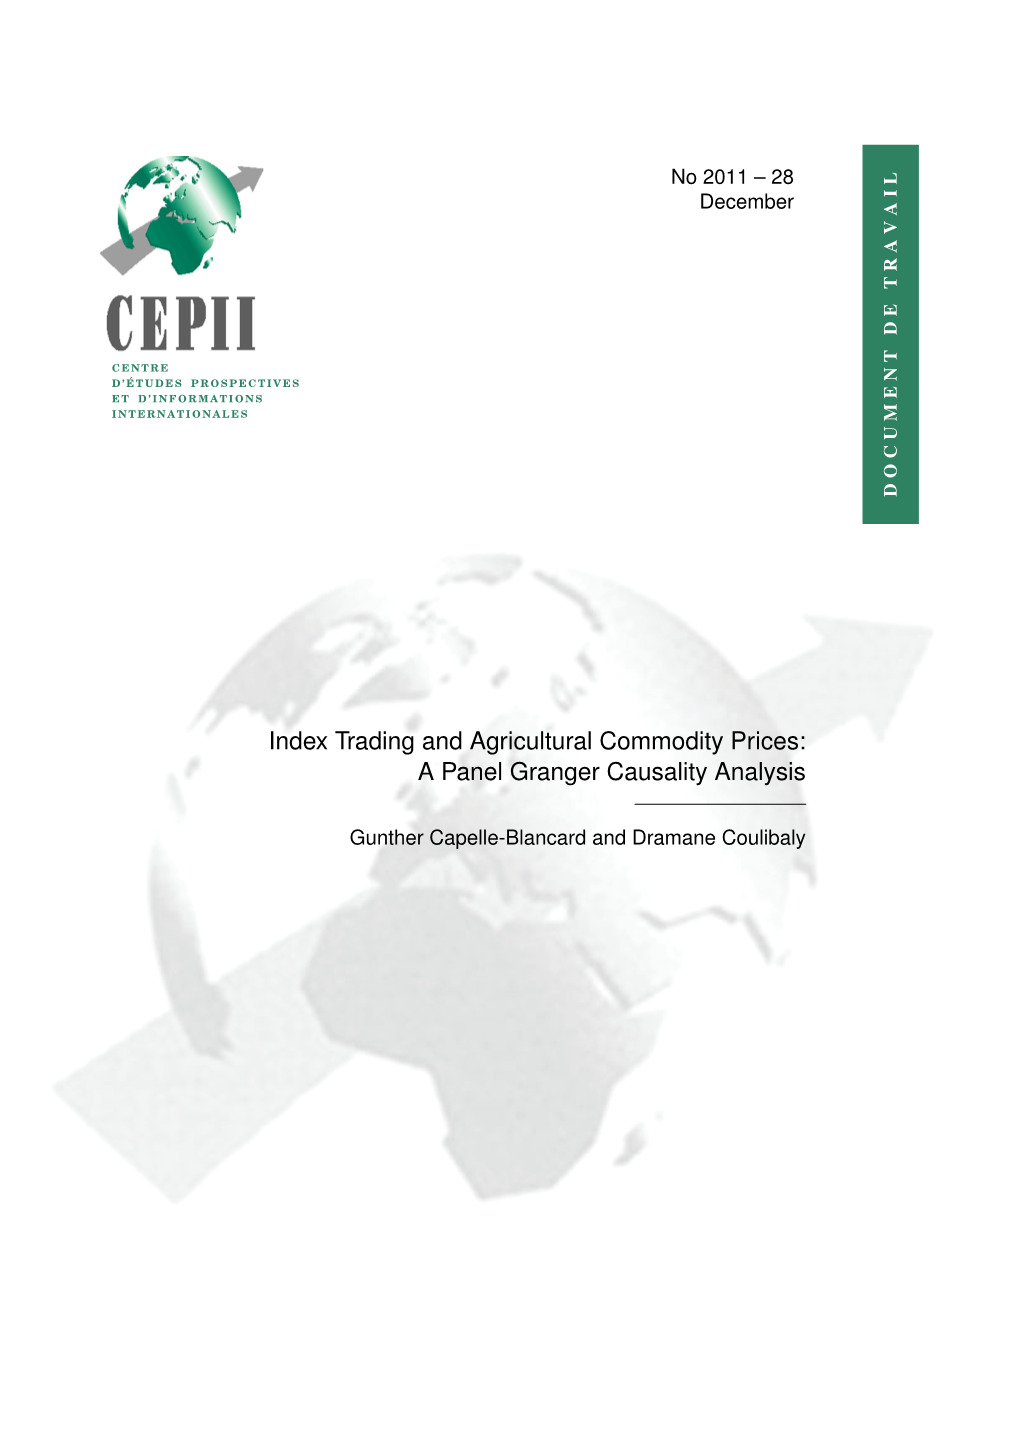 Trading and Agricultural Commodity Prices: a Panel Granger Causality Analysis